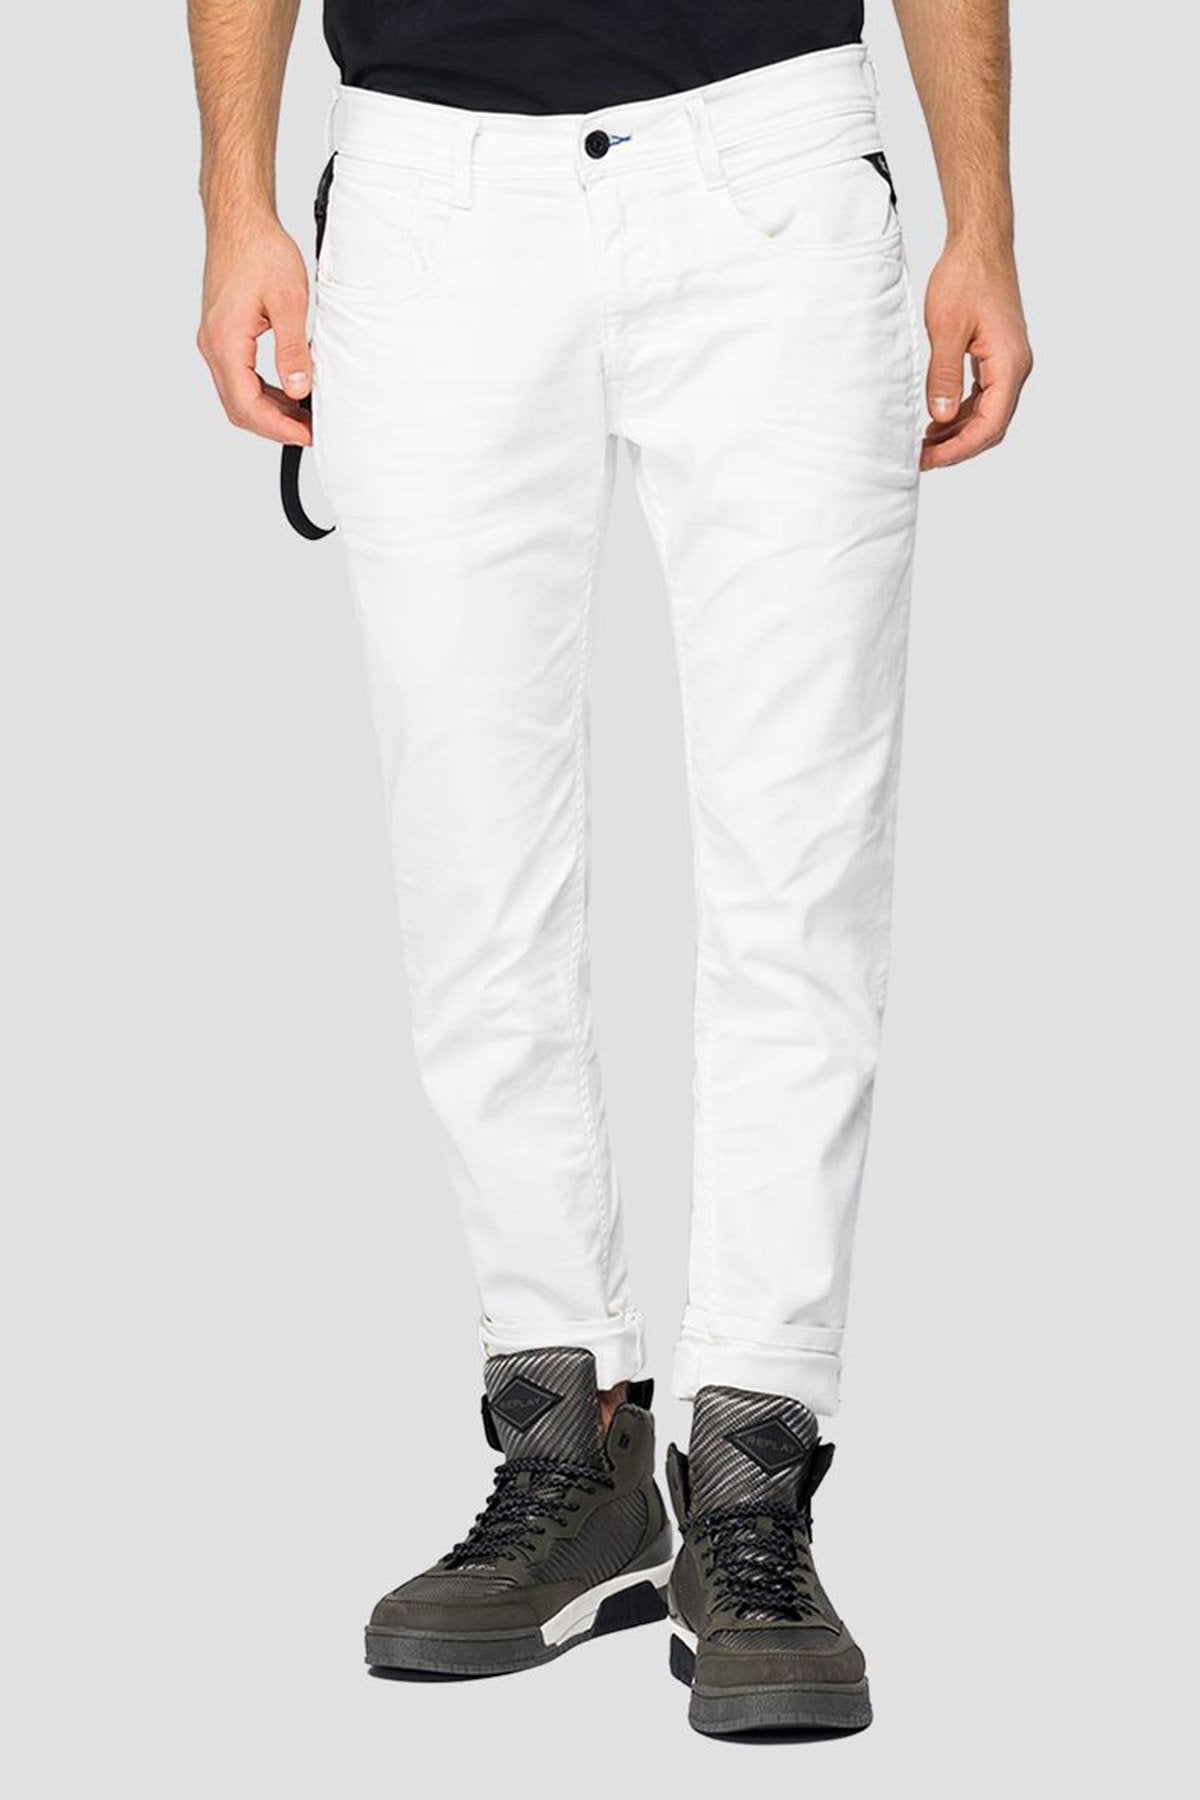 Replay Karter Slim Fit Jeans-Libas Trendy Fashion Store